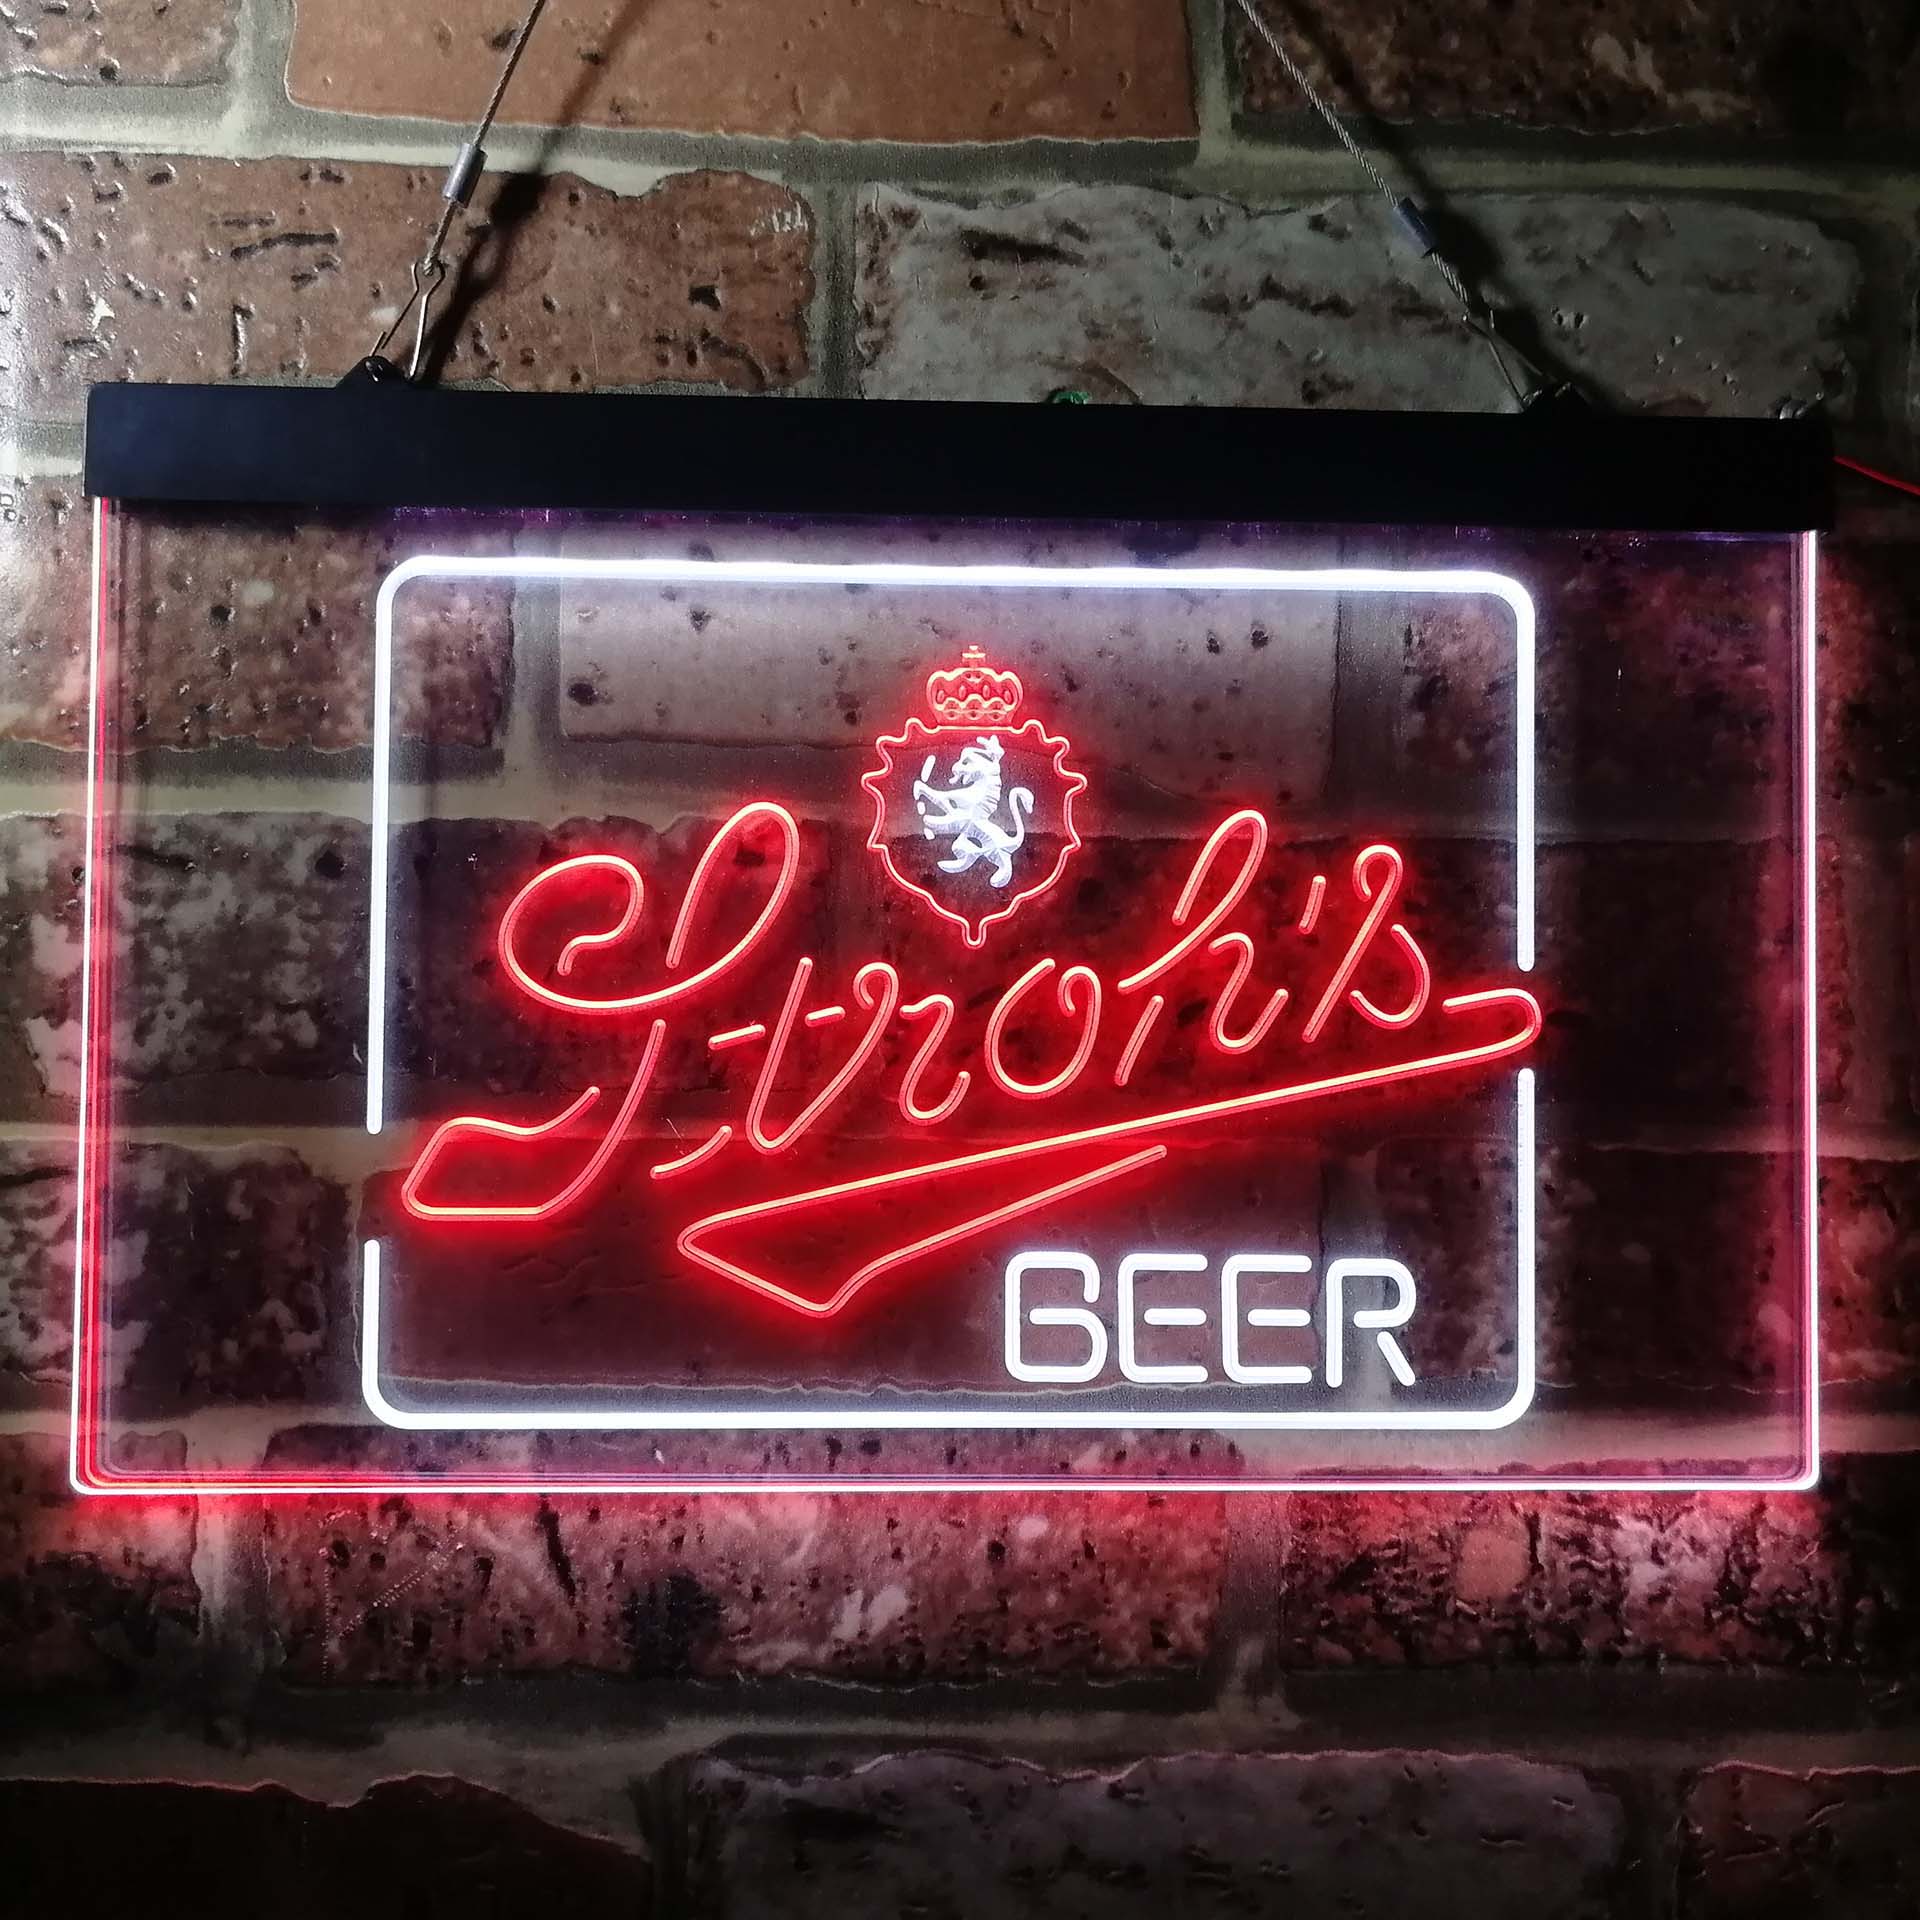 Stroh's Beer Man Cave Bar Neon-Like LED Sign